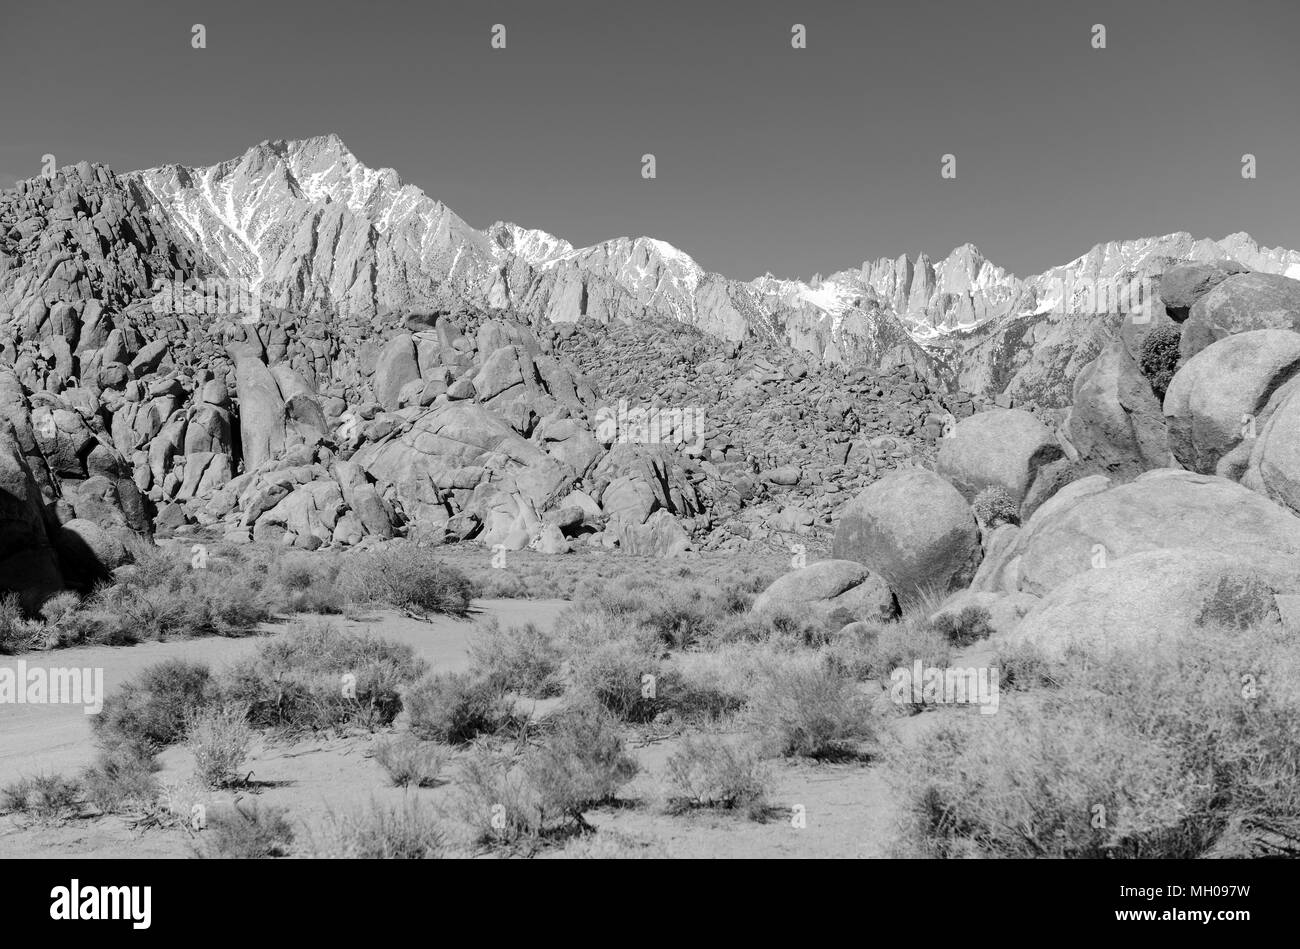 Mount Whitney and the Alabama Hills, California 14er, state high point and highest peak in the lower 48 states, located in the Sierra Nevada Mountains Stock Photo